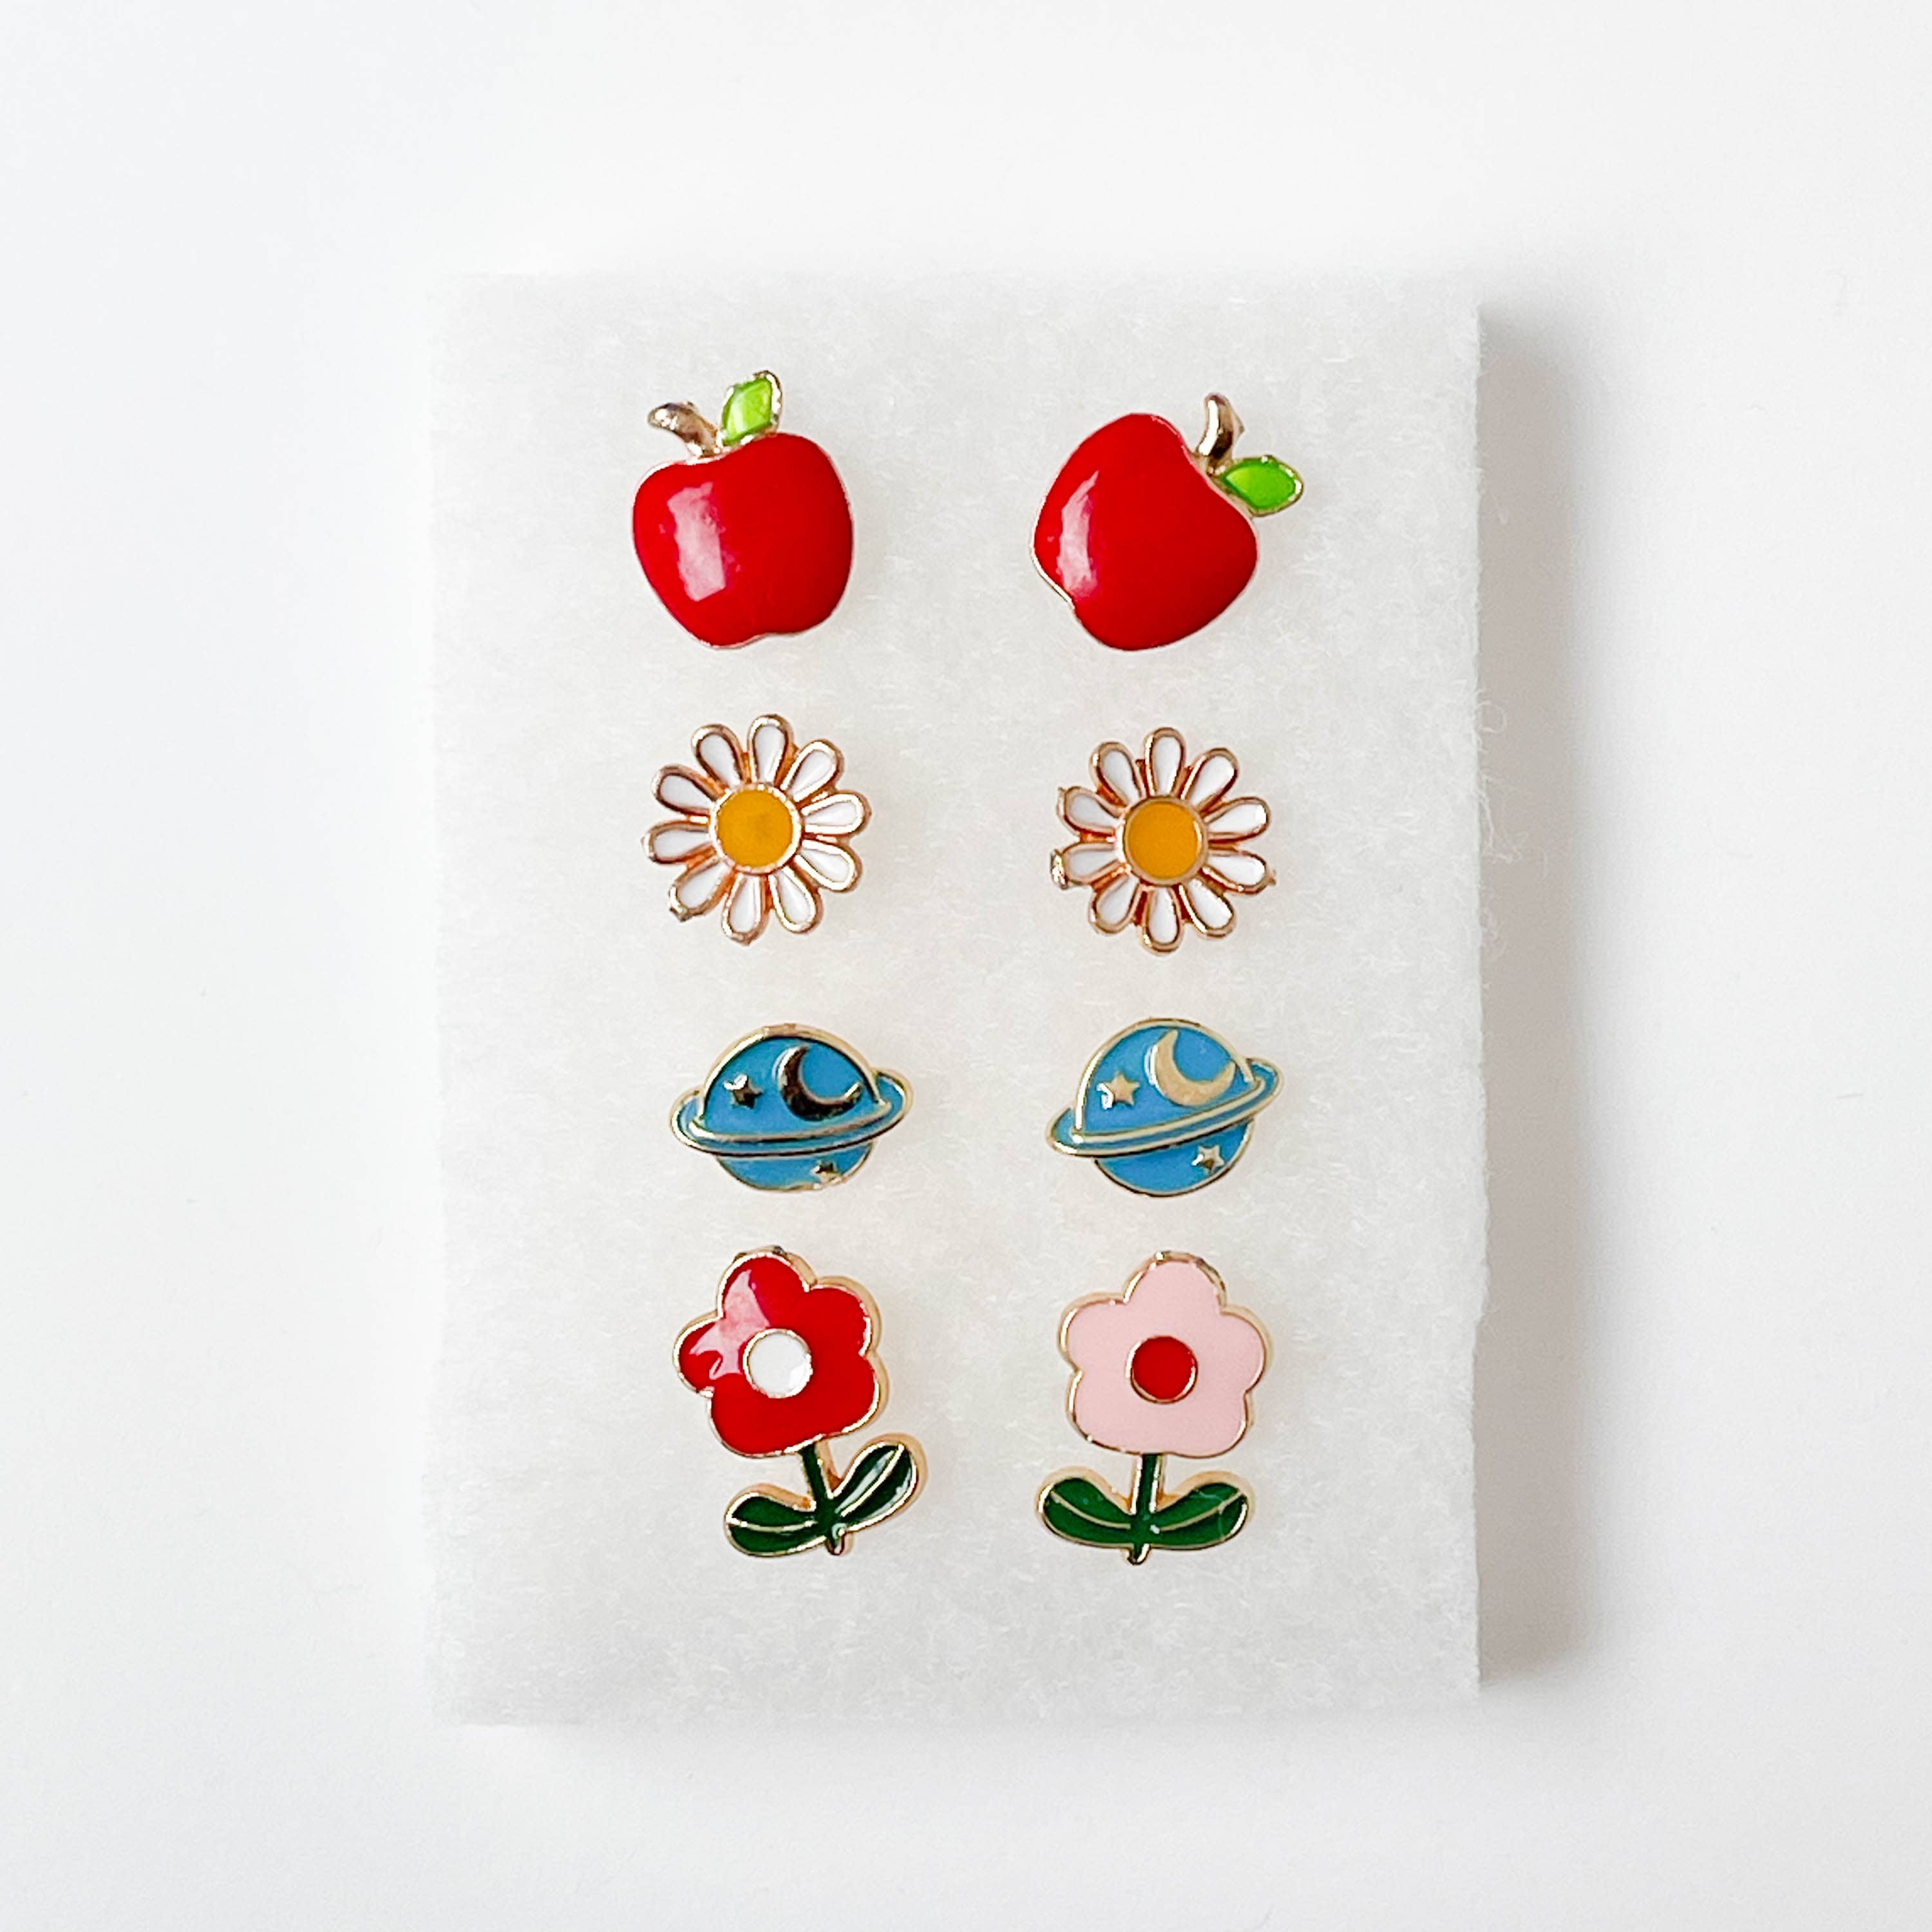 Nest Pretty Things - Kids' Stud Earrings, kids stocking stuffers and holiday gift